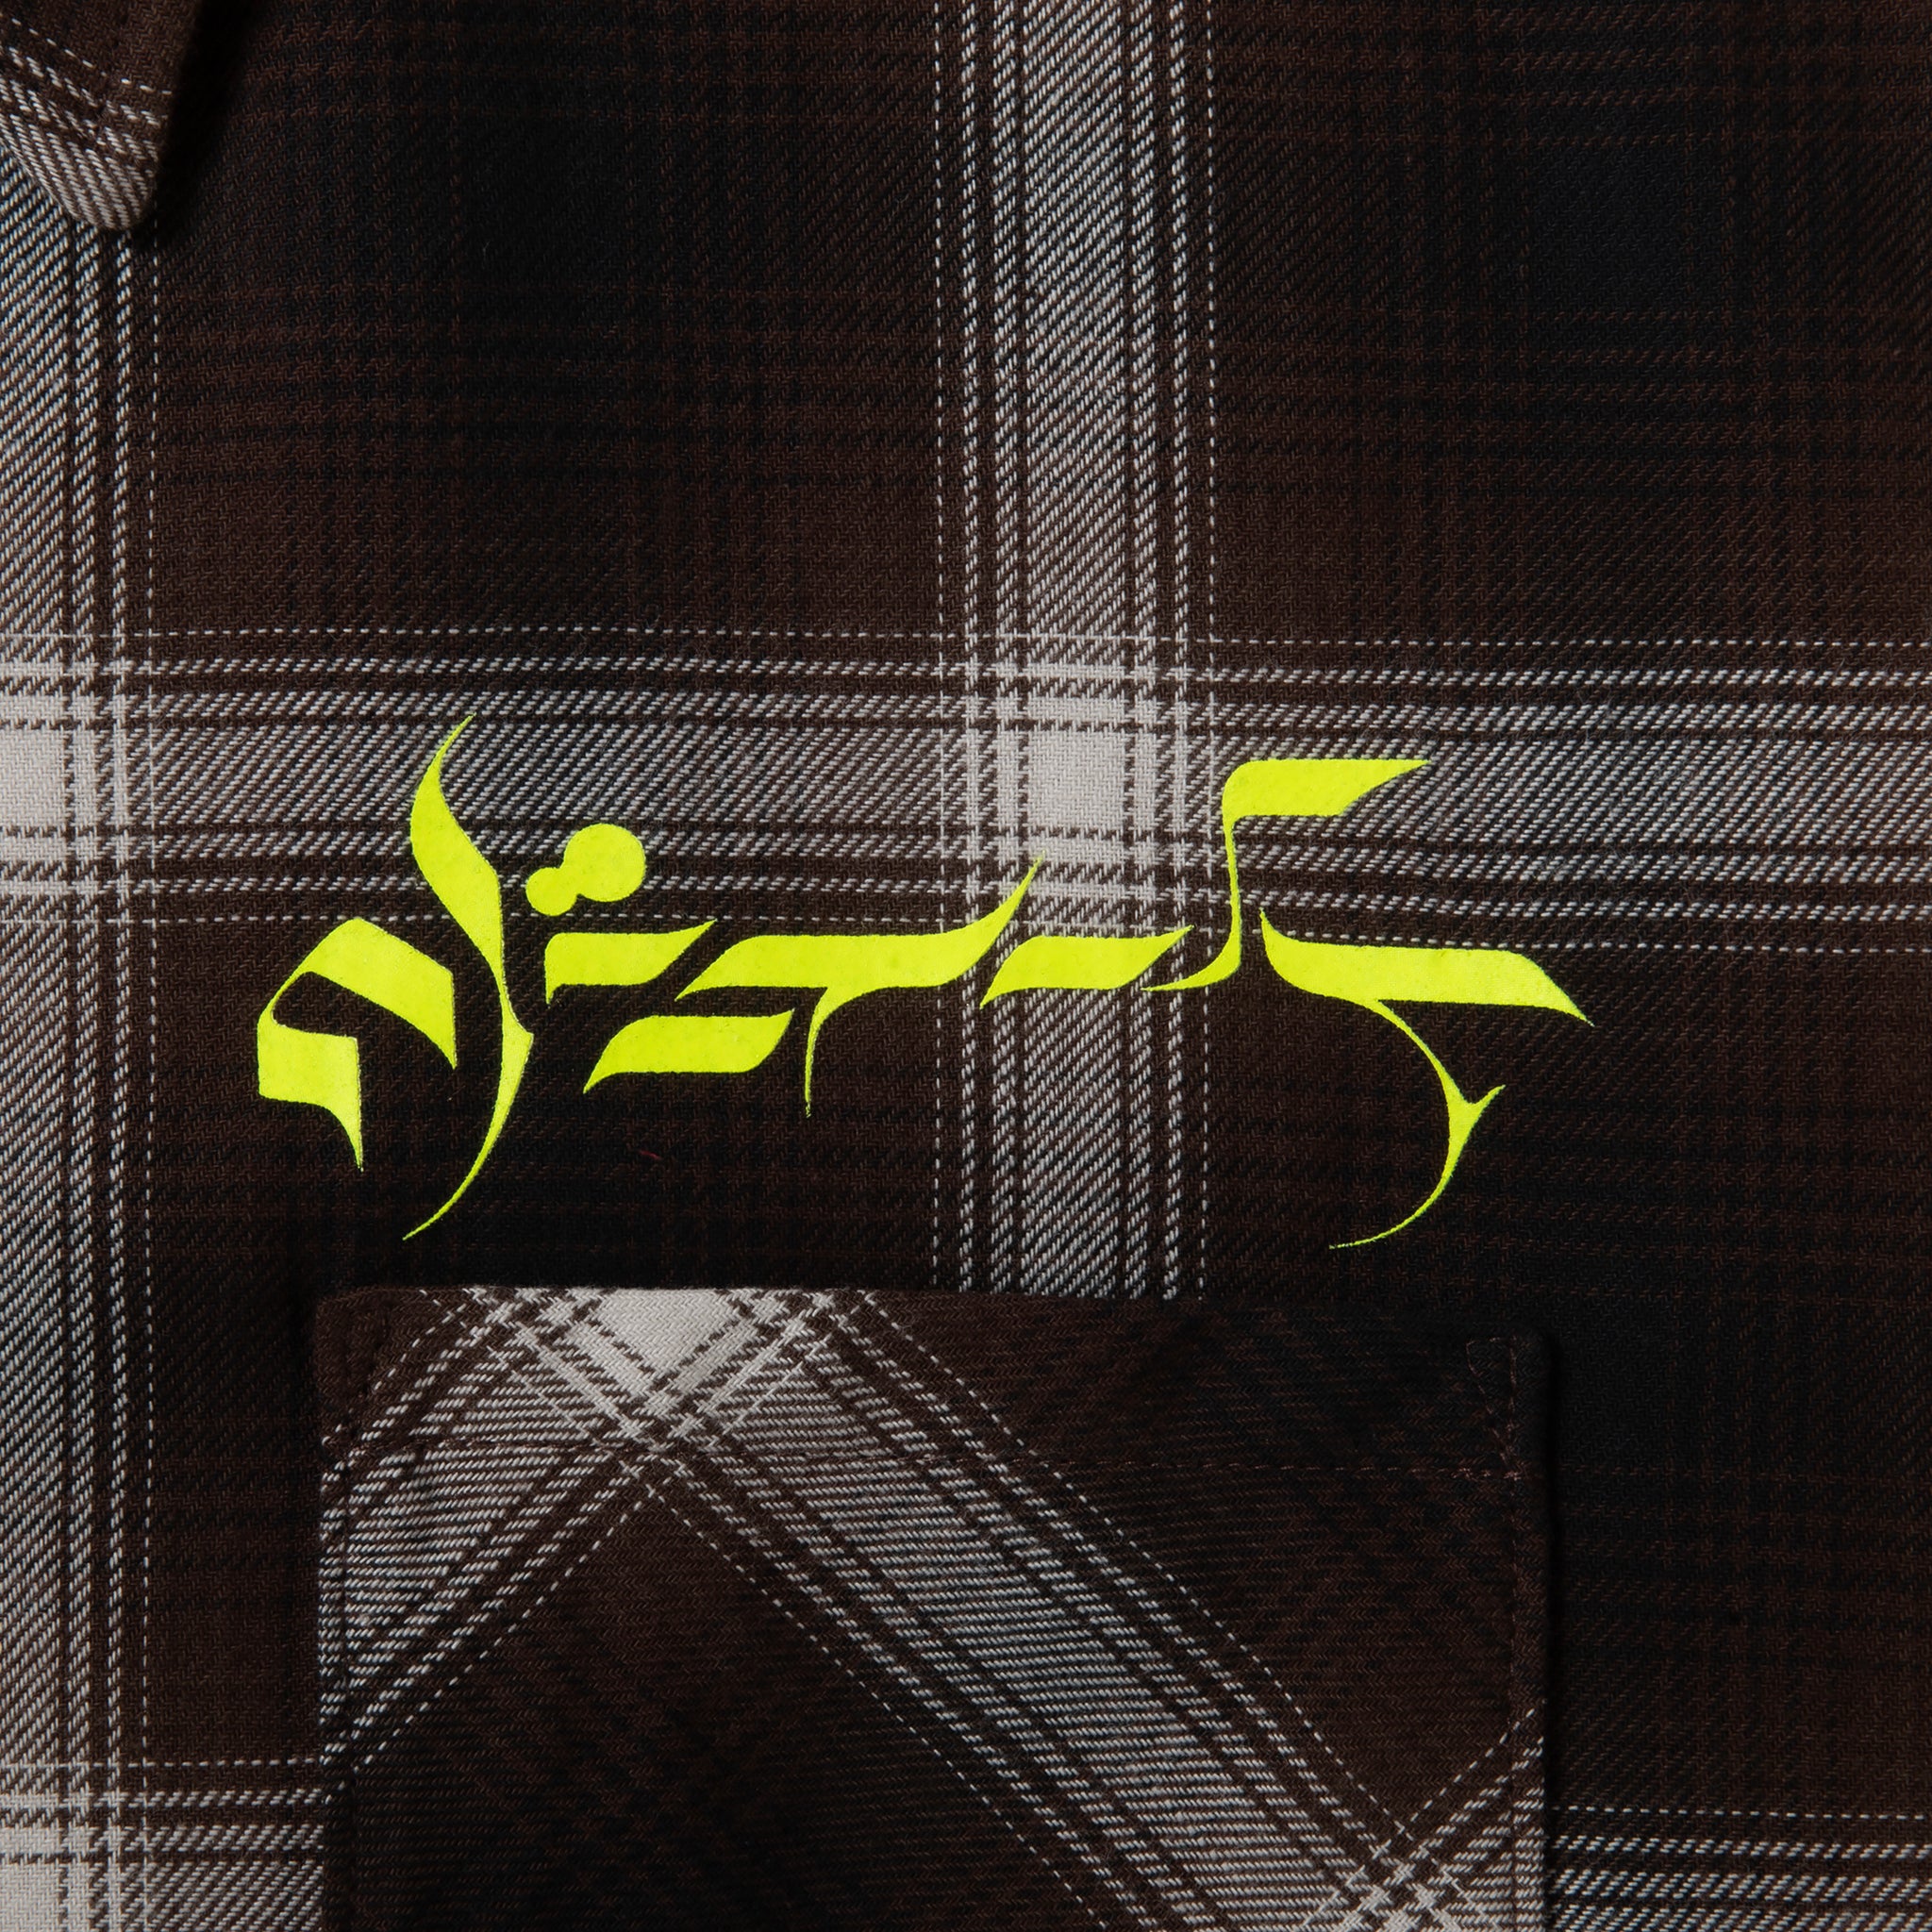 loosejoints≒RAFU - GUCCIMAZE - 'Joints' Fluo printed Flannel shirt (Brown)